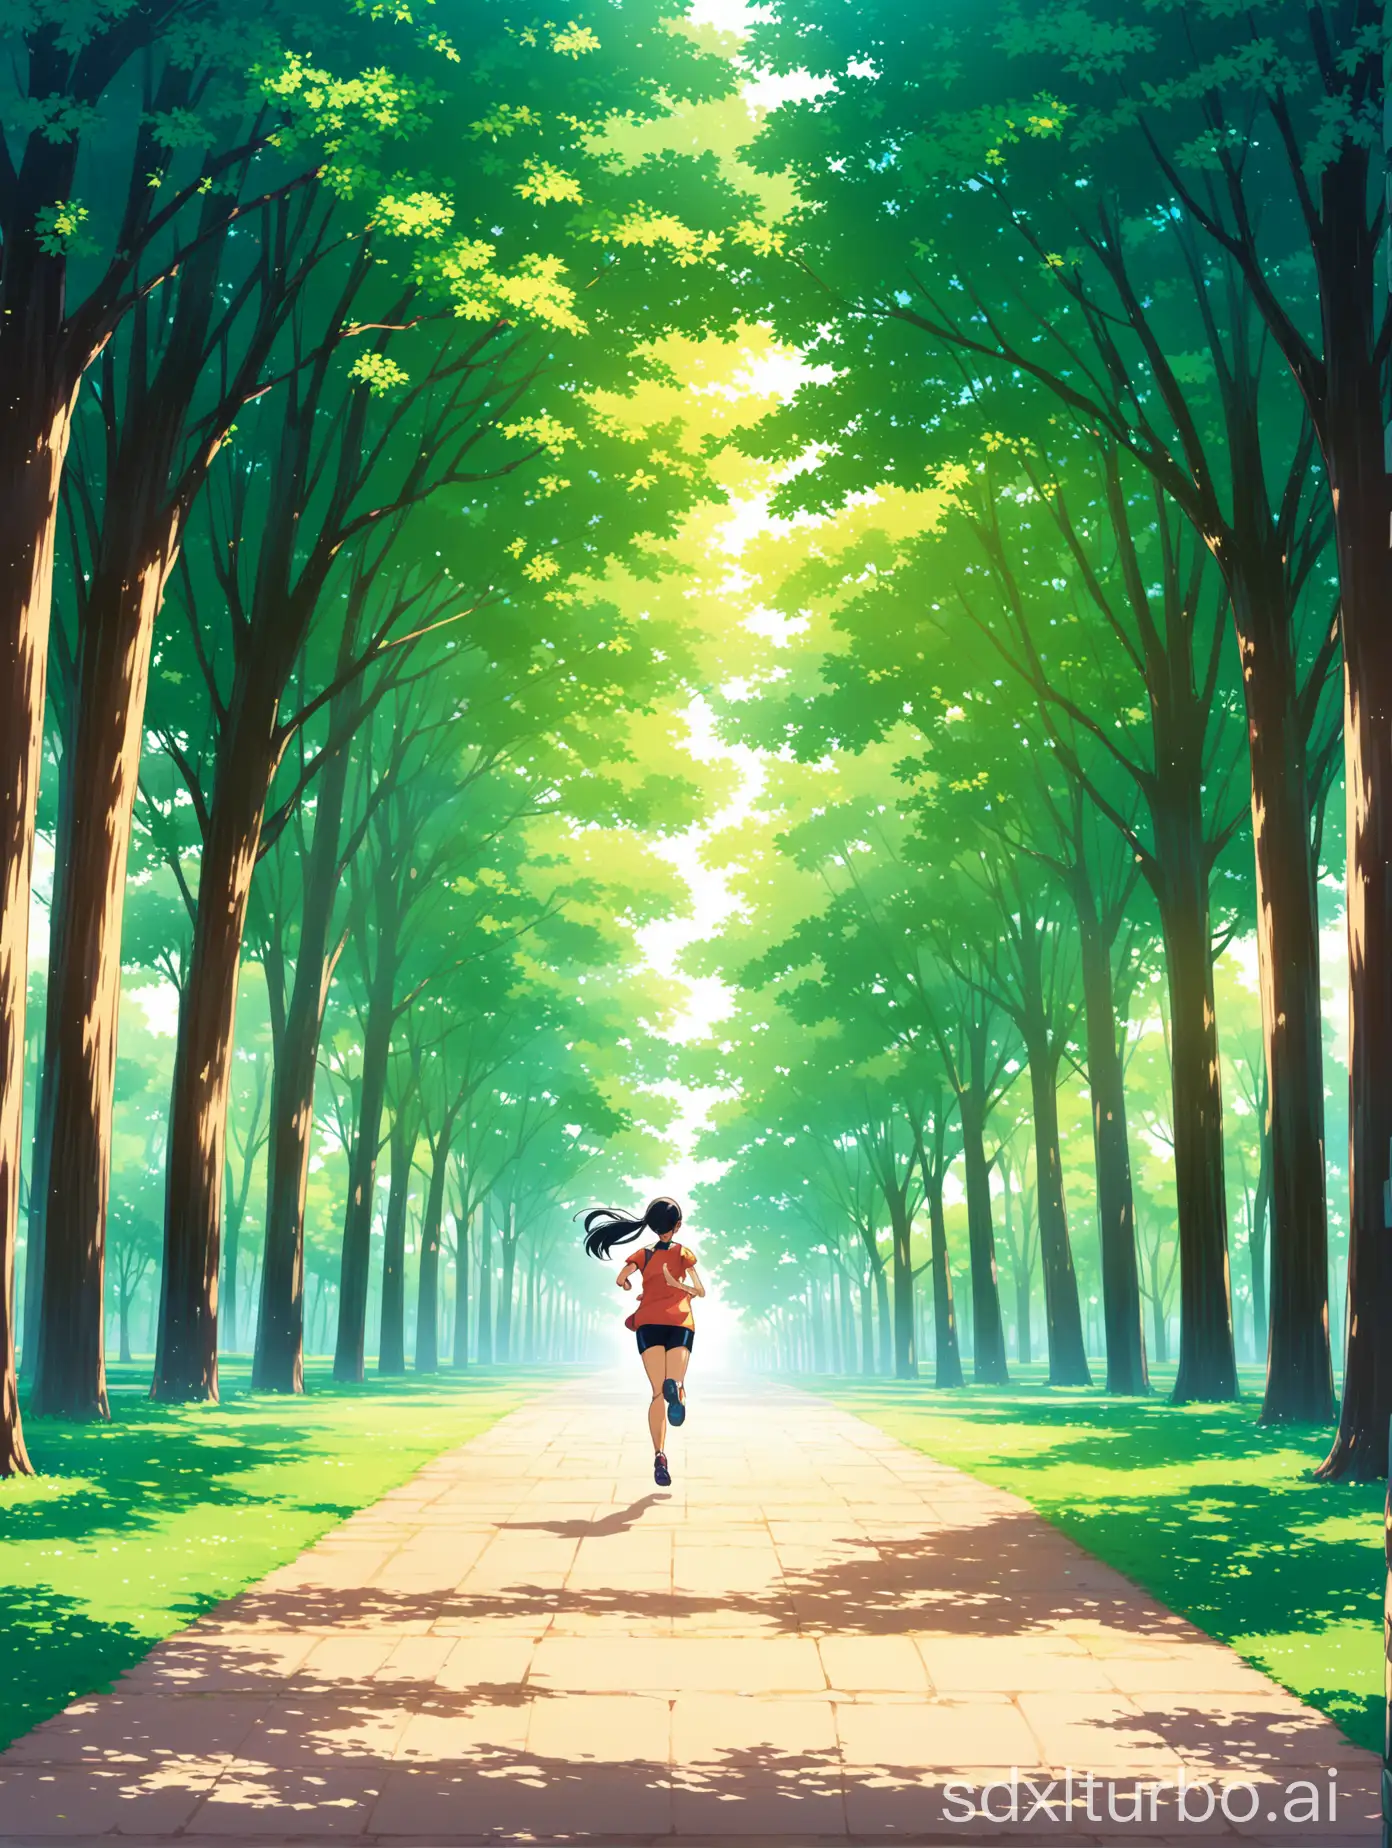 An anime background for running a marathon in park.